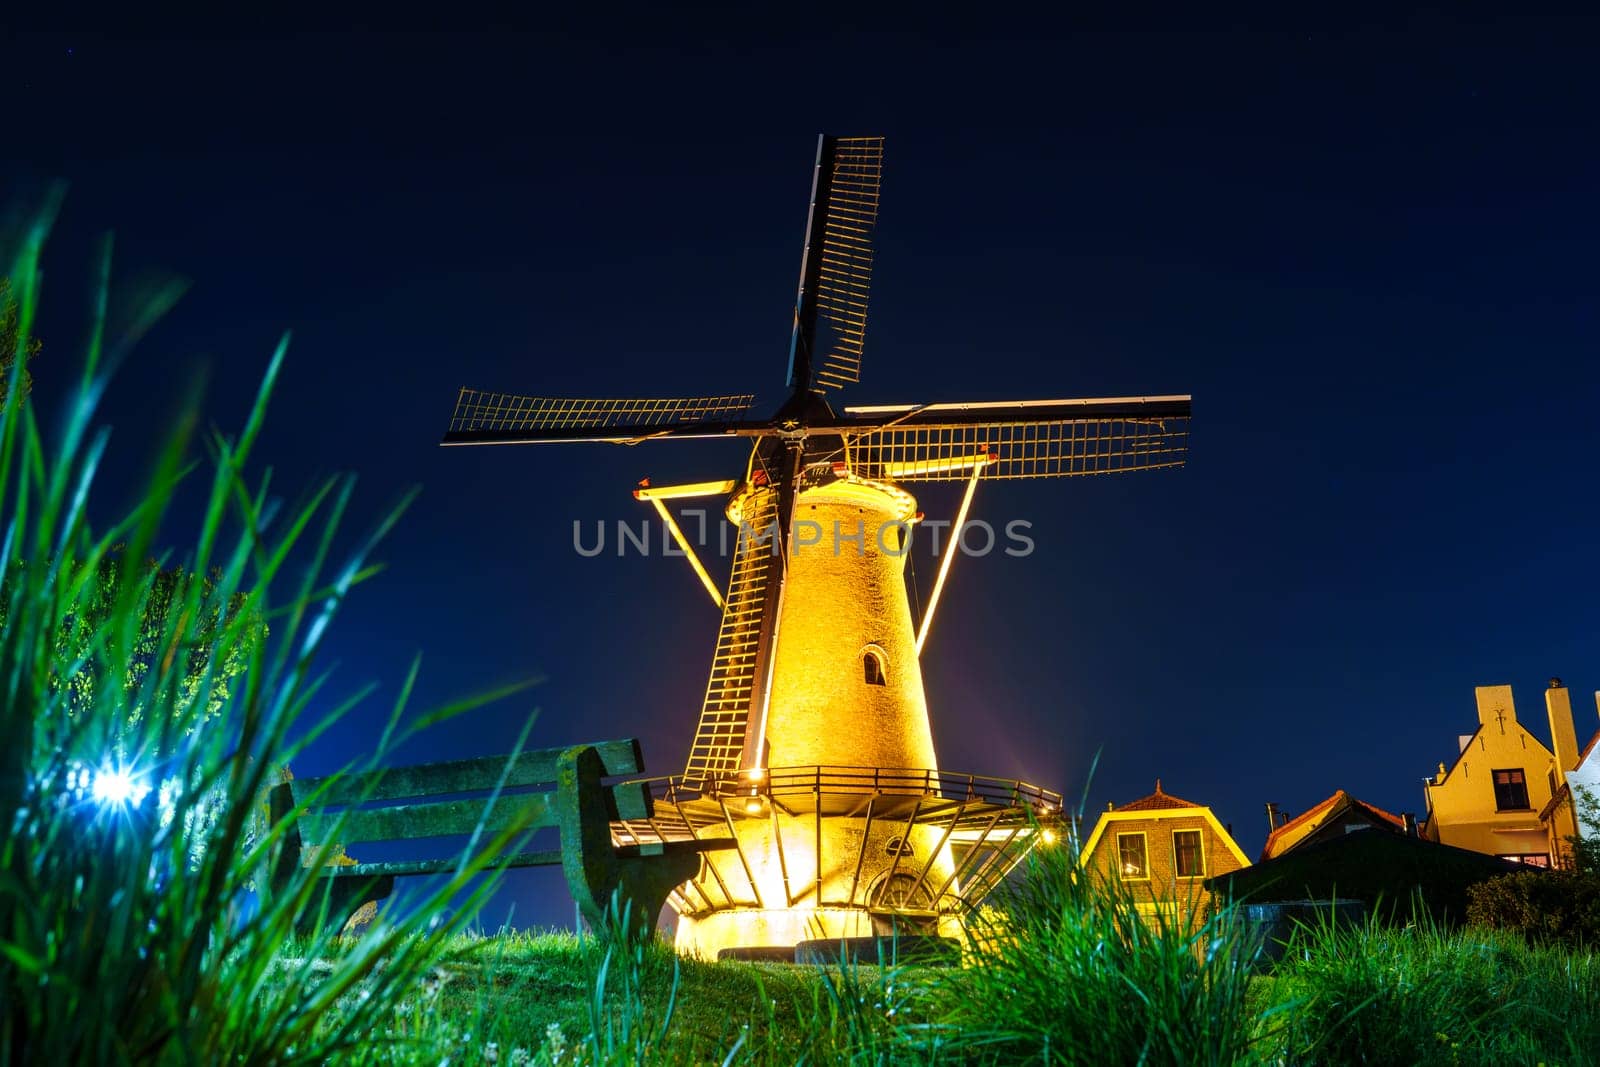 Old Windmill Illuminated by Lights at Night in Zierikzee, Netherlands by PhotoTime